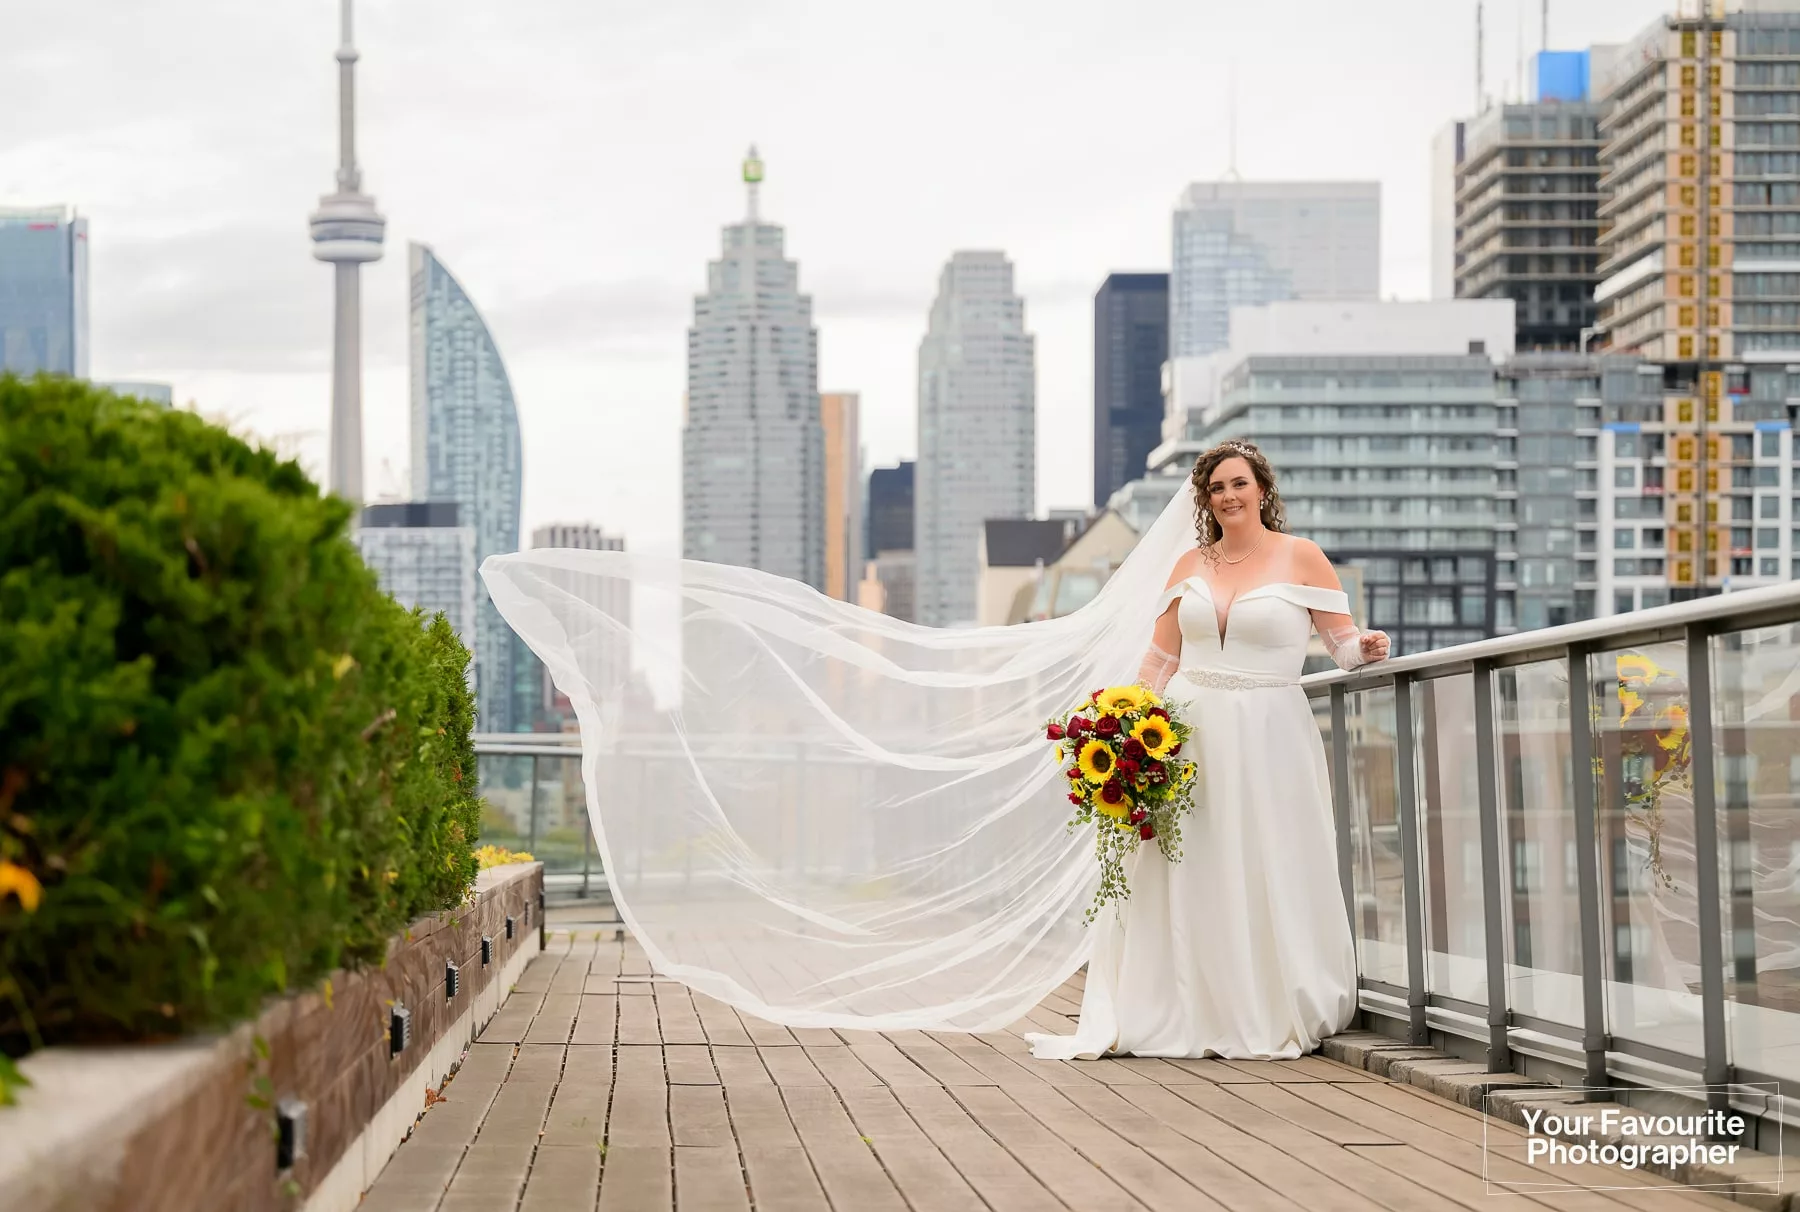 Bride Emily's veil flies in the wind as she poses on a rooftop patio in front of the downtown Toronto skyline